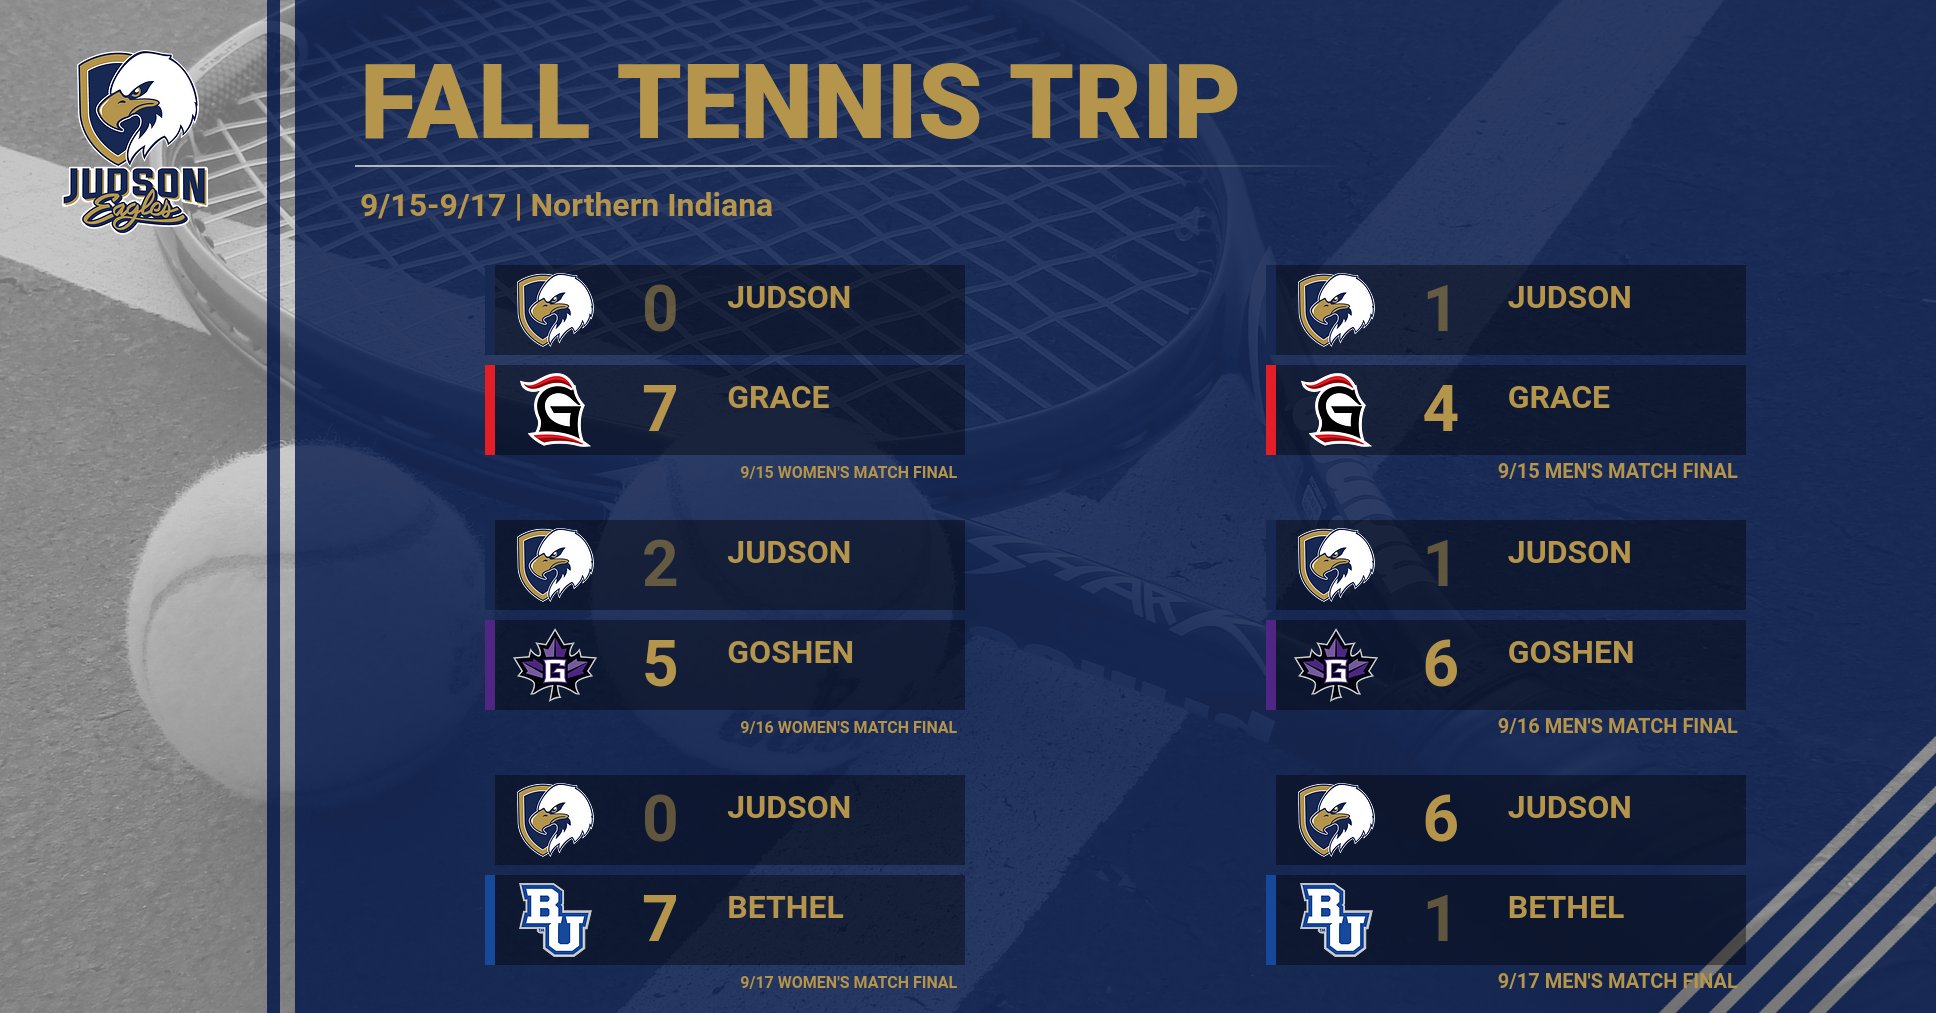 Judson Tennis Participates in Fall Northern Indiana Trip